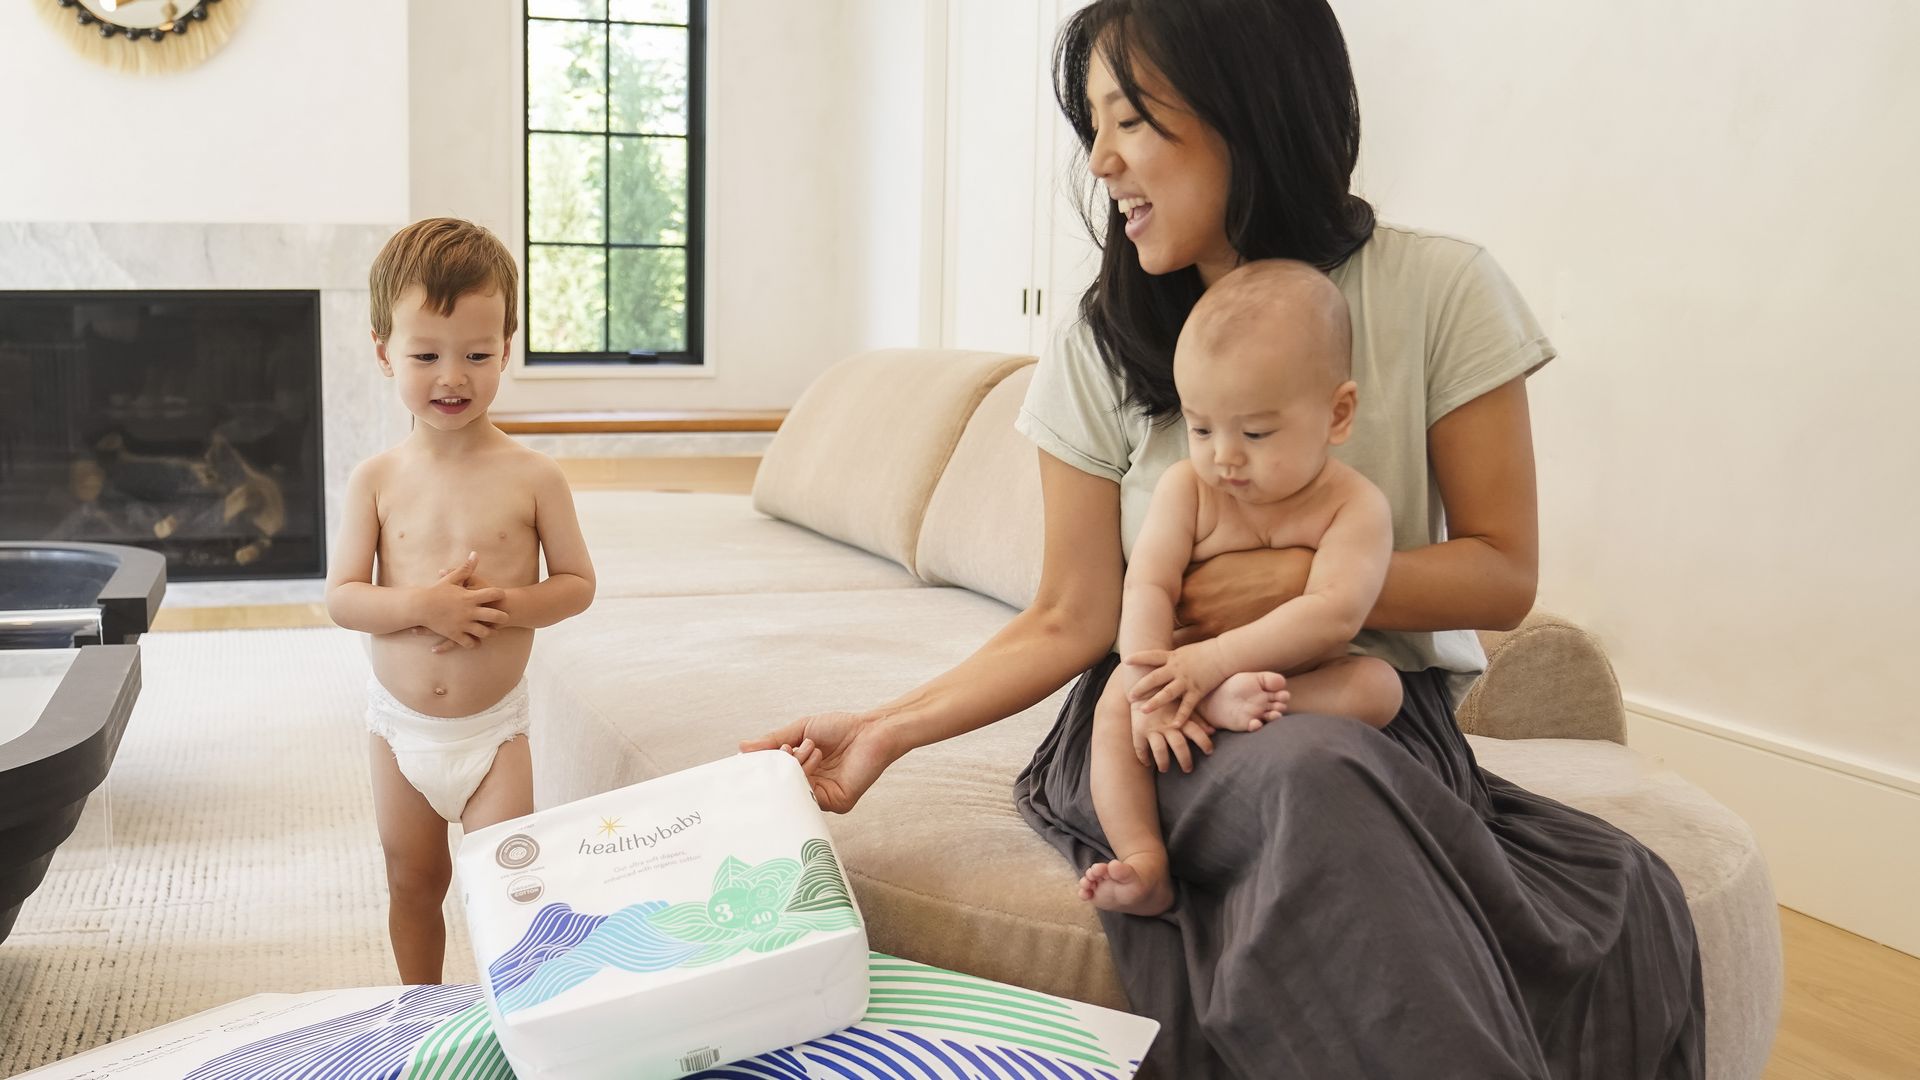 A mother with dark hair sits in a living room swathed in a blanket with her infant and toddler as she examines a package of Healthybaby diapers.